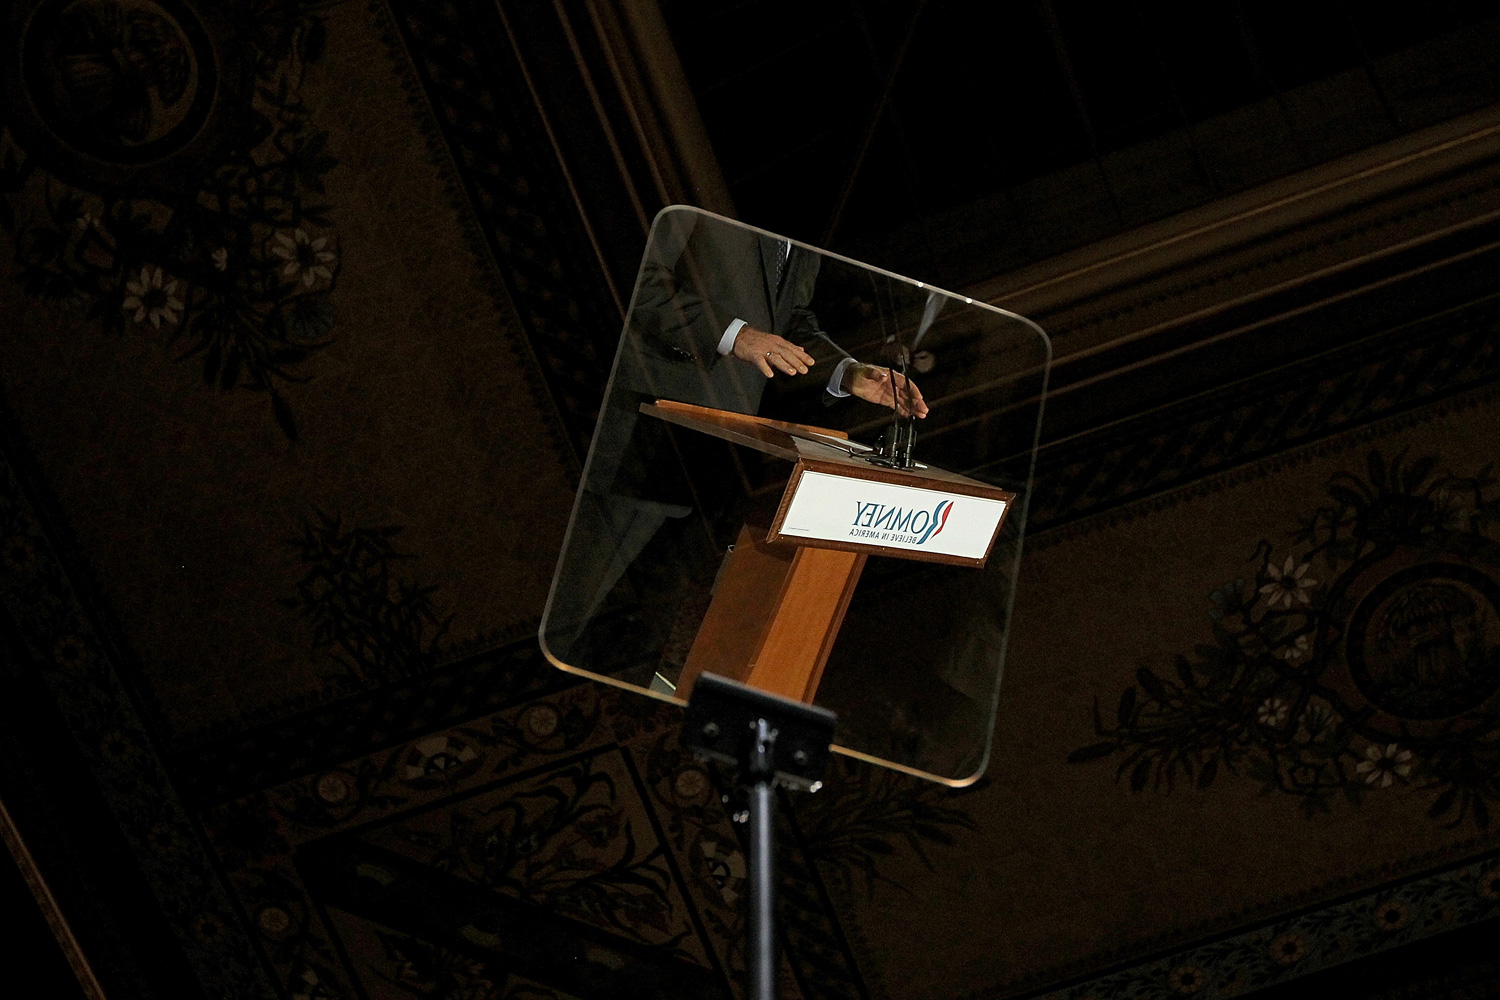 April 3, 2012. Republican presidential candidate Mitt Romney is seen reflected in a teleprompter as he speaks to supporters during his primary-night gathering at The Grain Exchange in Milwaukee, Wis.